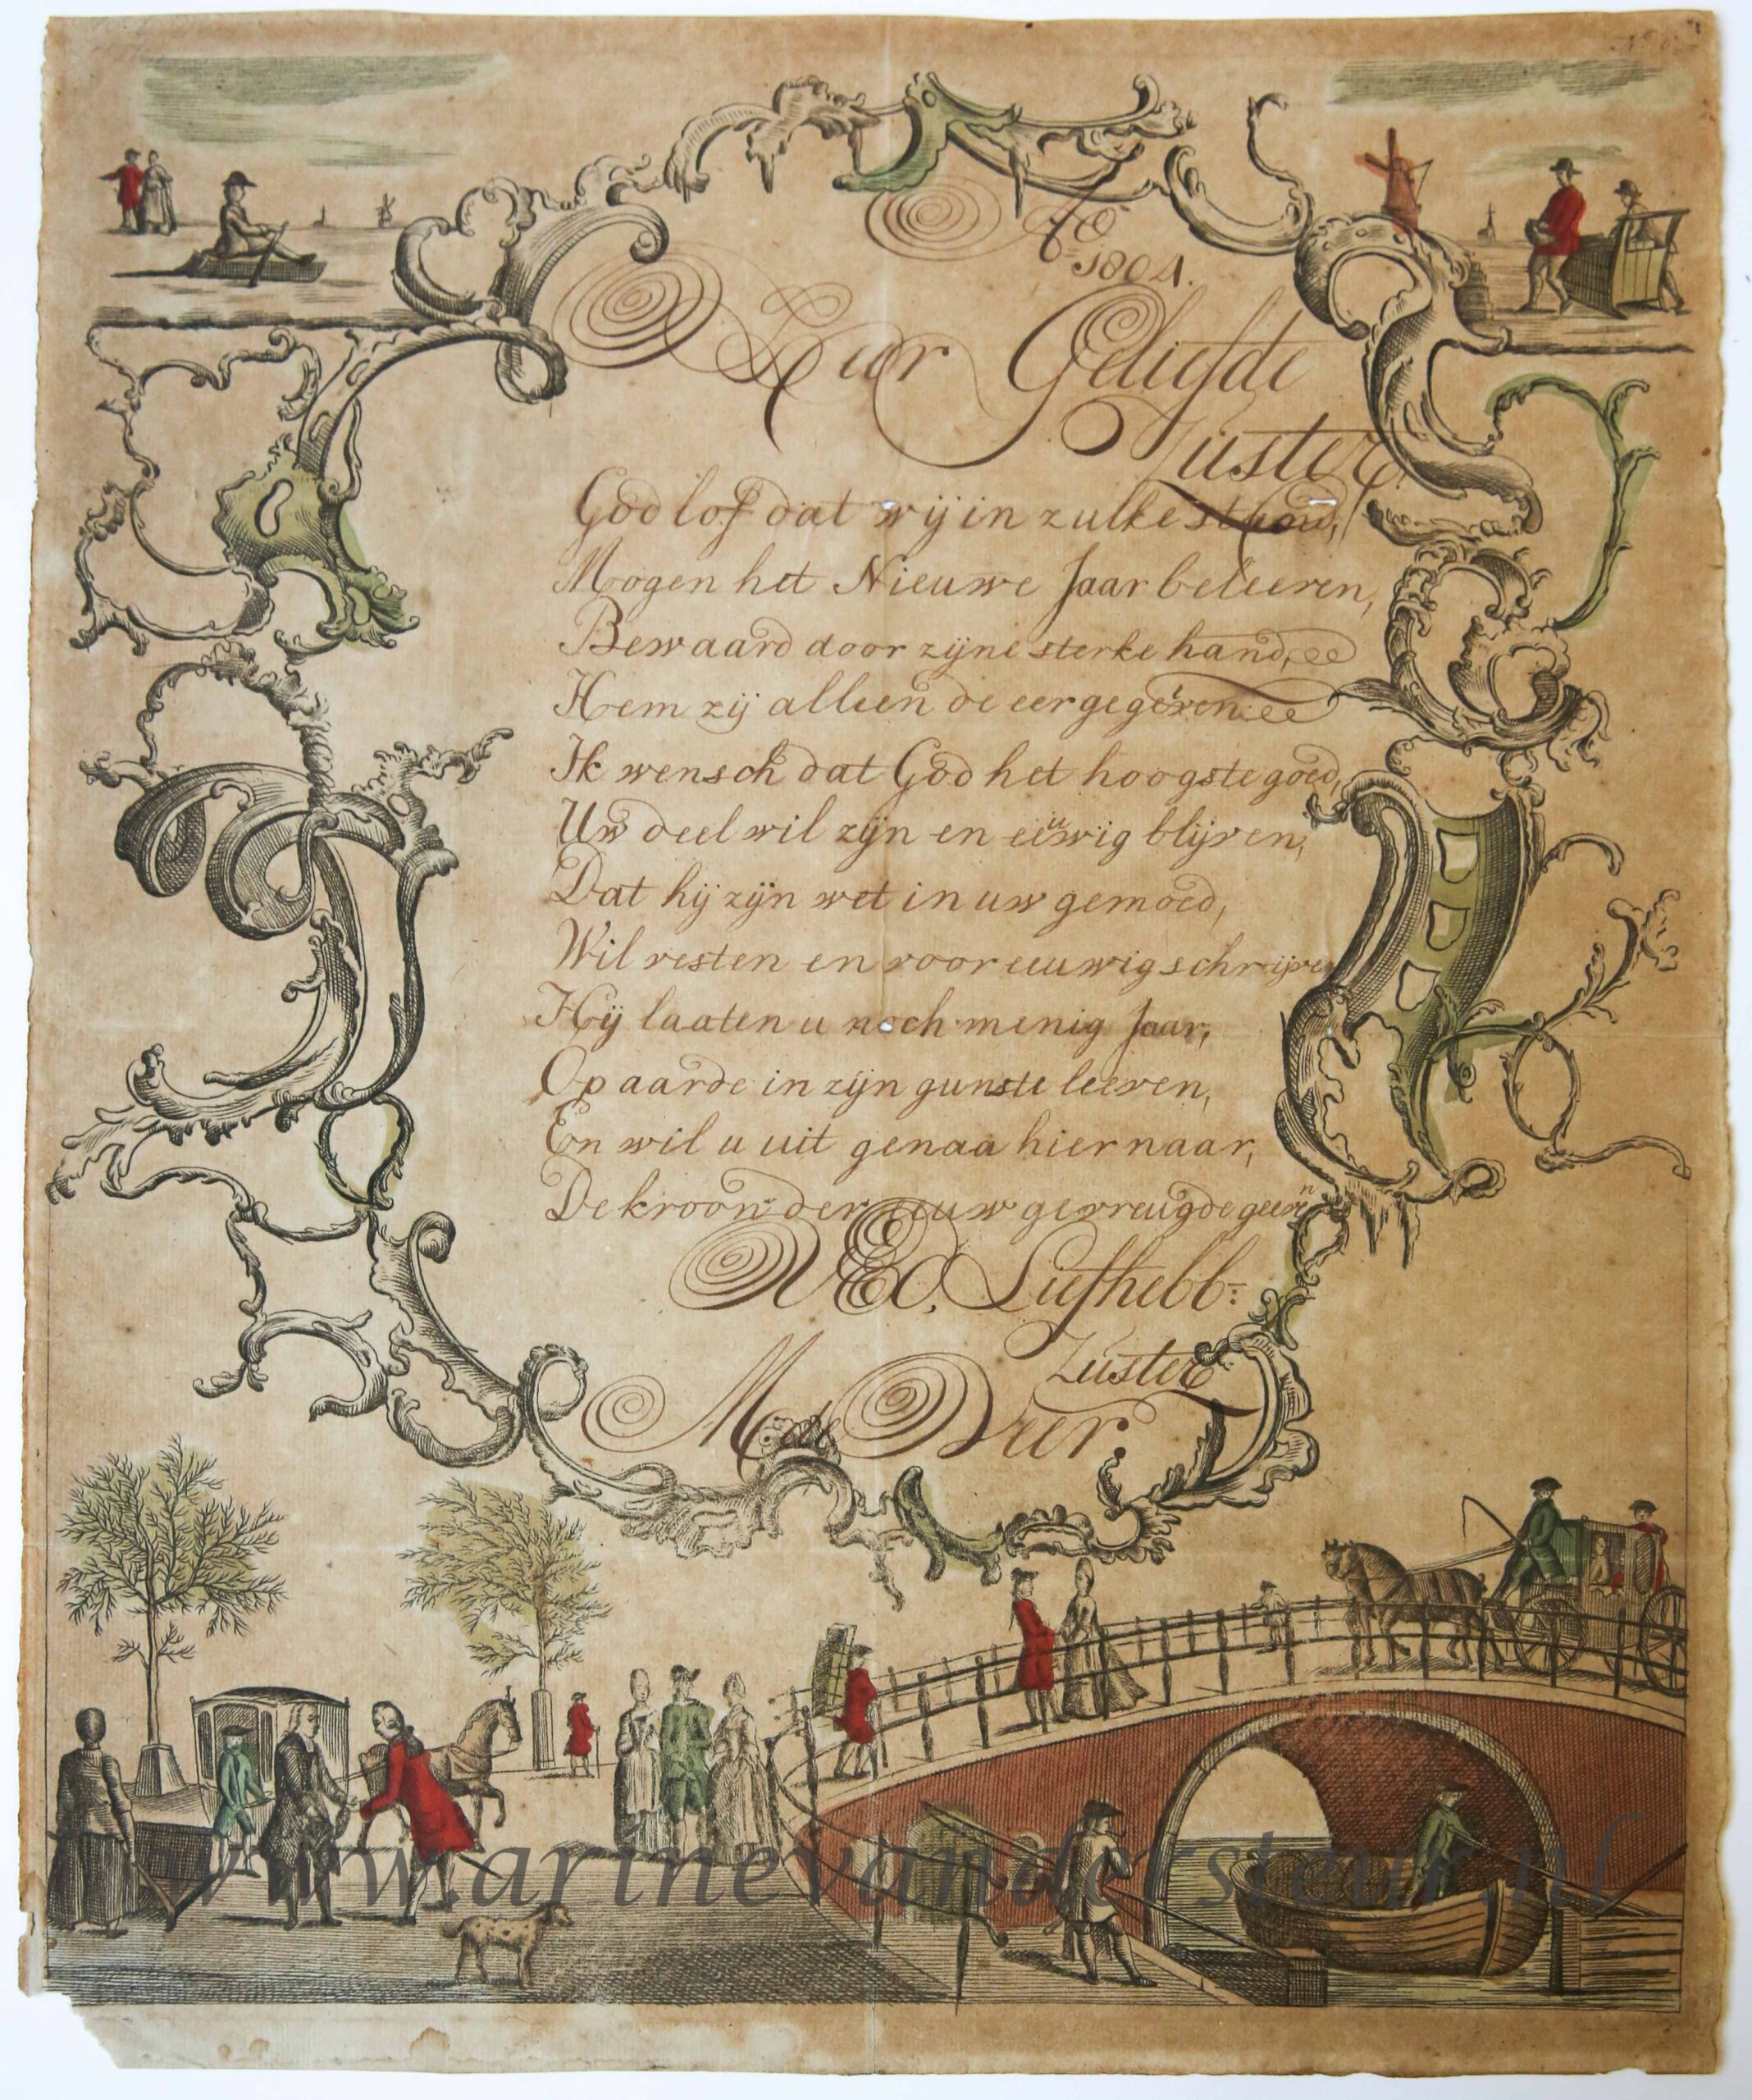 [Nieuwjaarswensch / New Year Wishes, 1804] M. de Veer. Hand colored wishcard with city views, dated 1804, 1 p.